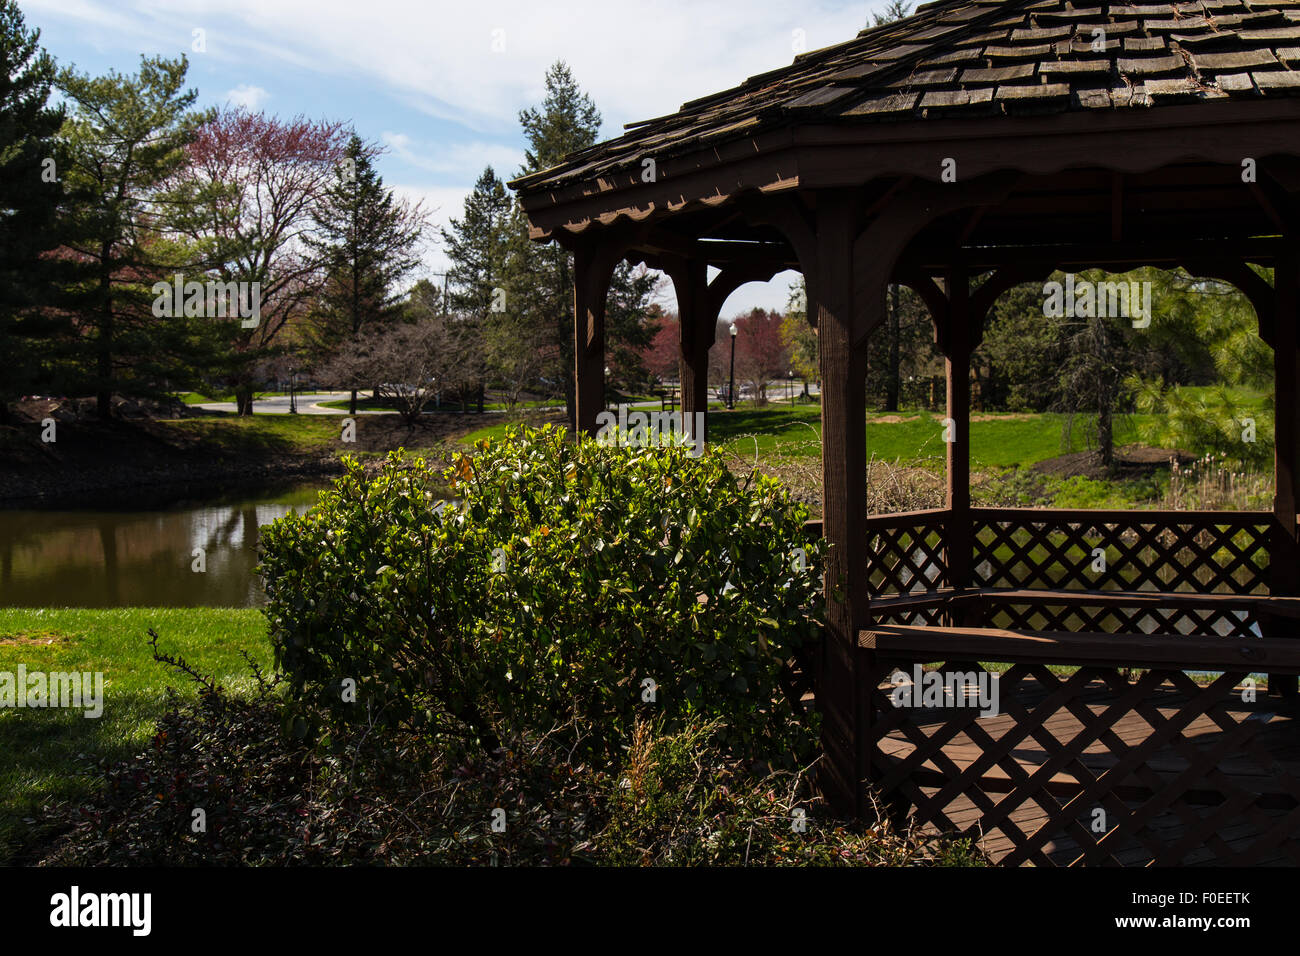 Serene scene at a suburban park known as Greenfield near Lancaster, PA. Stock Photo